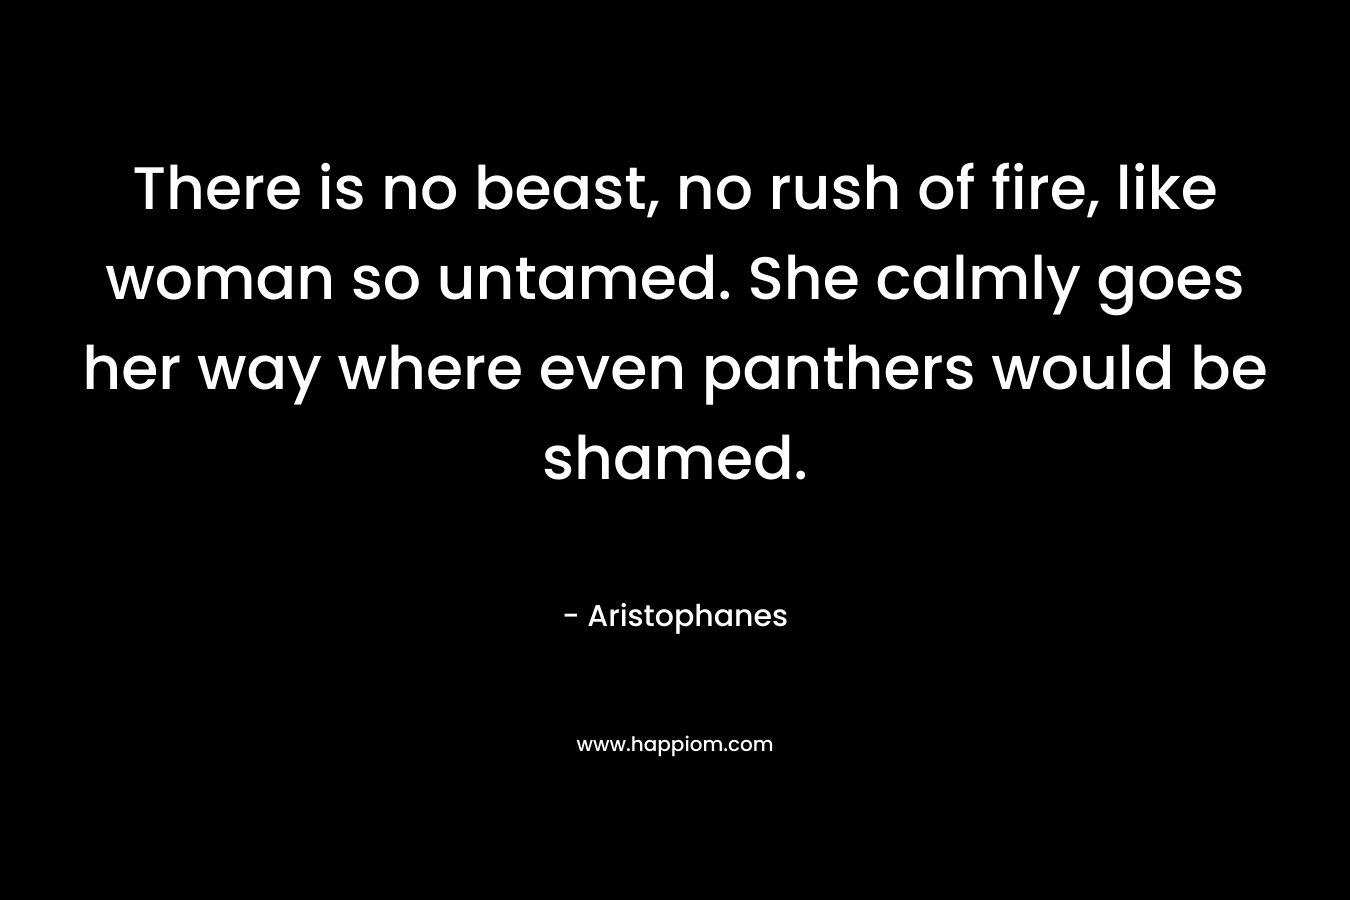 There is no beast, no rush of fire, like woman so untamed. She calmly goes her way where even panthers would be shamed. – Aristophanes